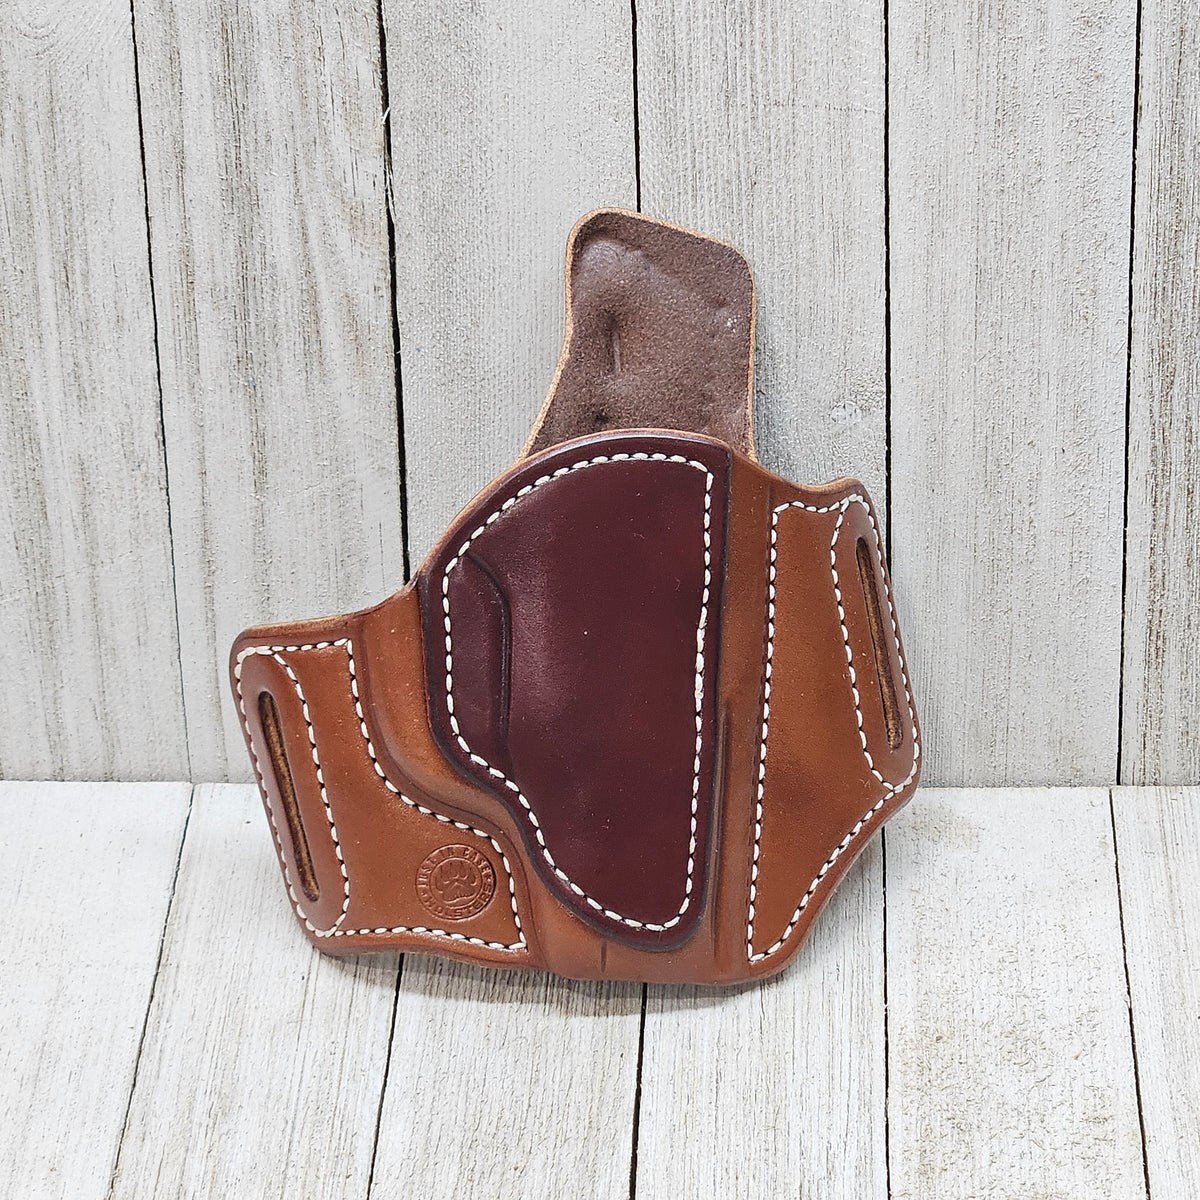 Ruger LC9/EC9/LC380 Classic Holster Finished in Brn/Mah with White Stitching